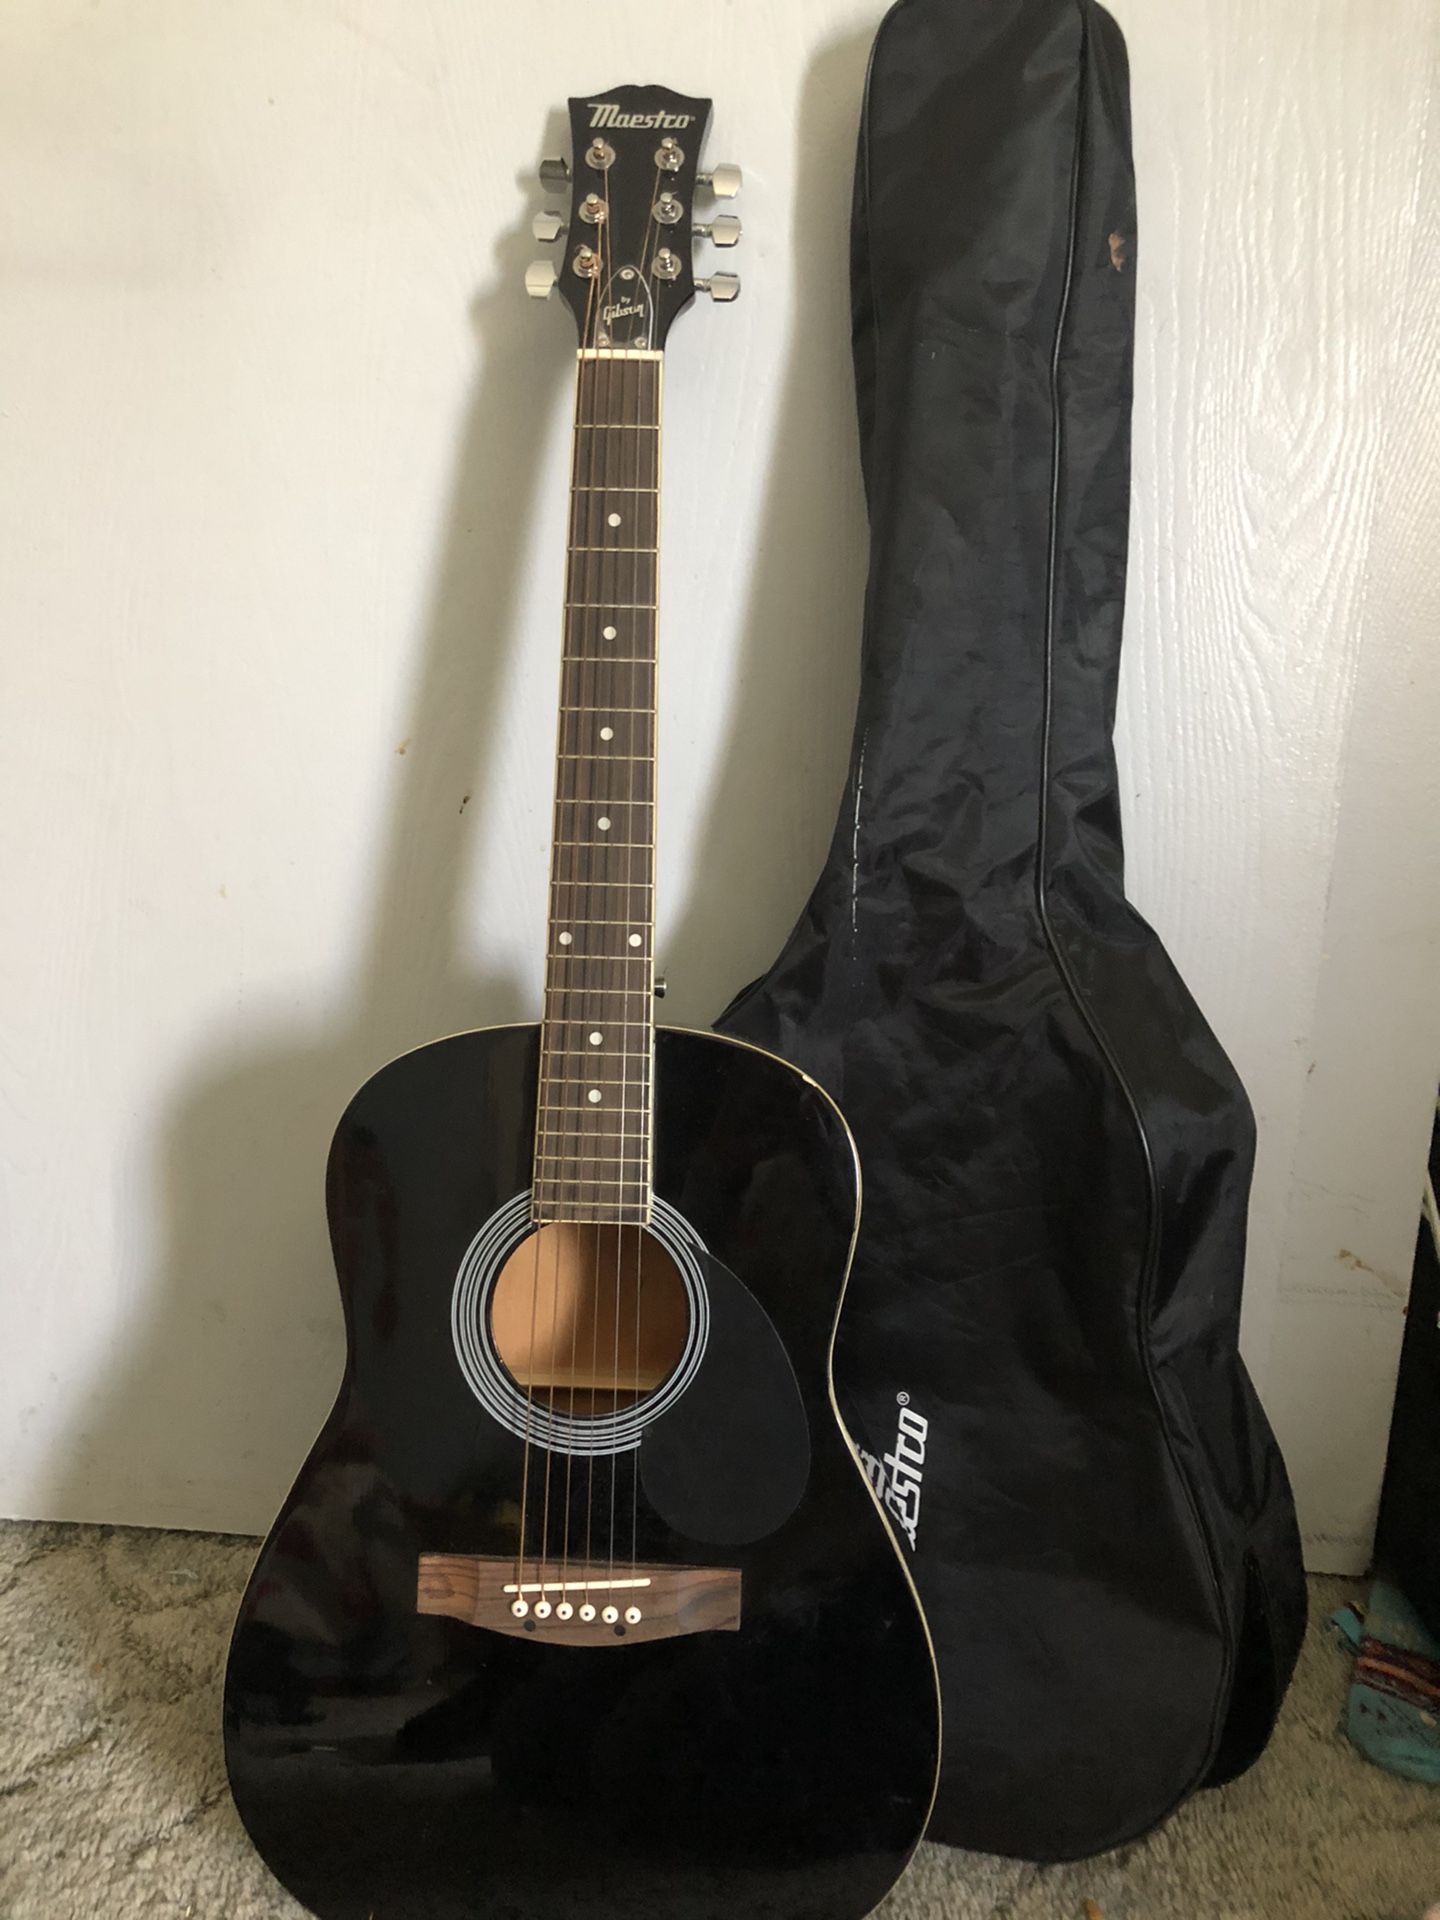 Maestro by Gibson acoustic guitar